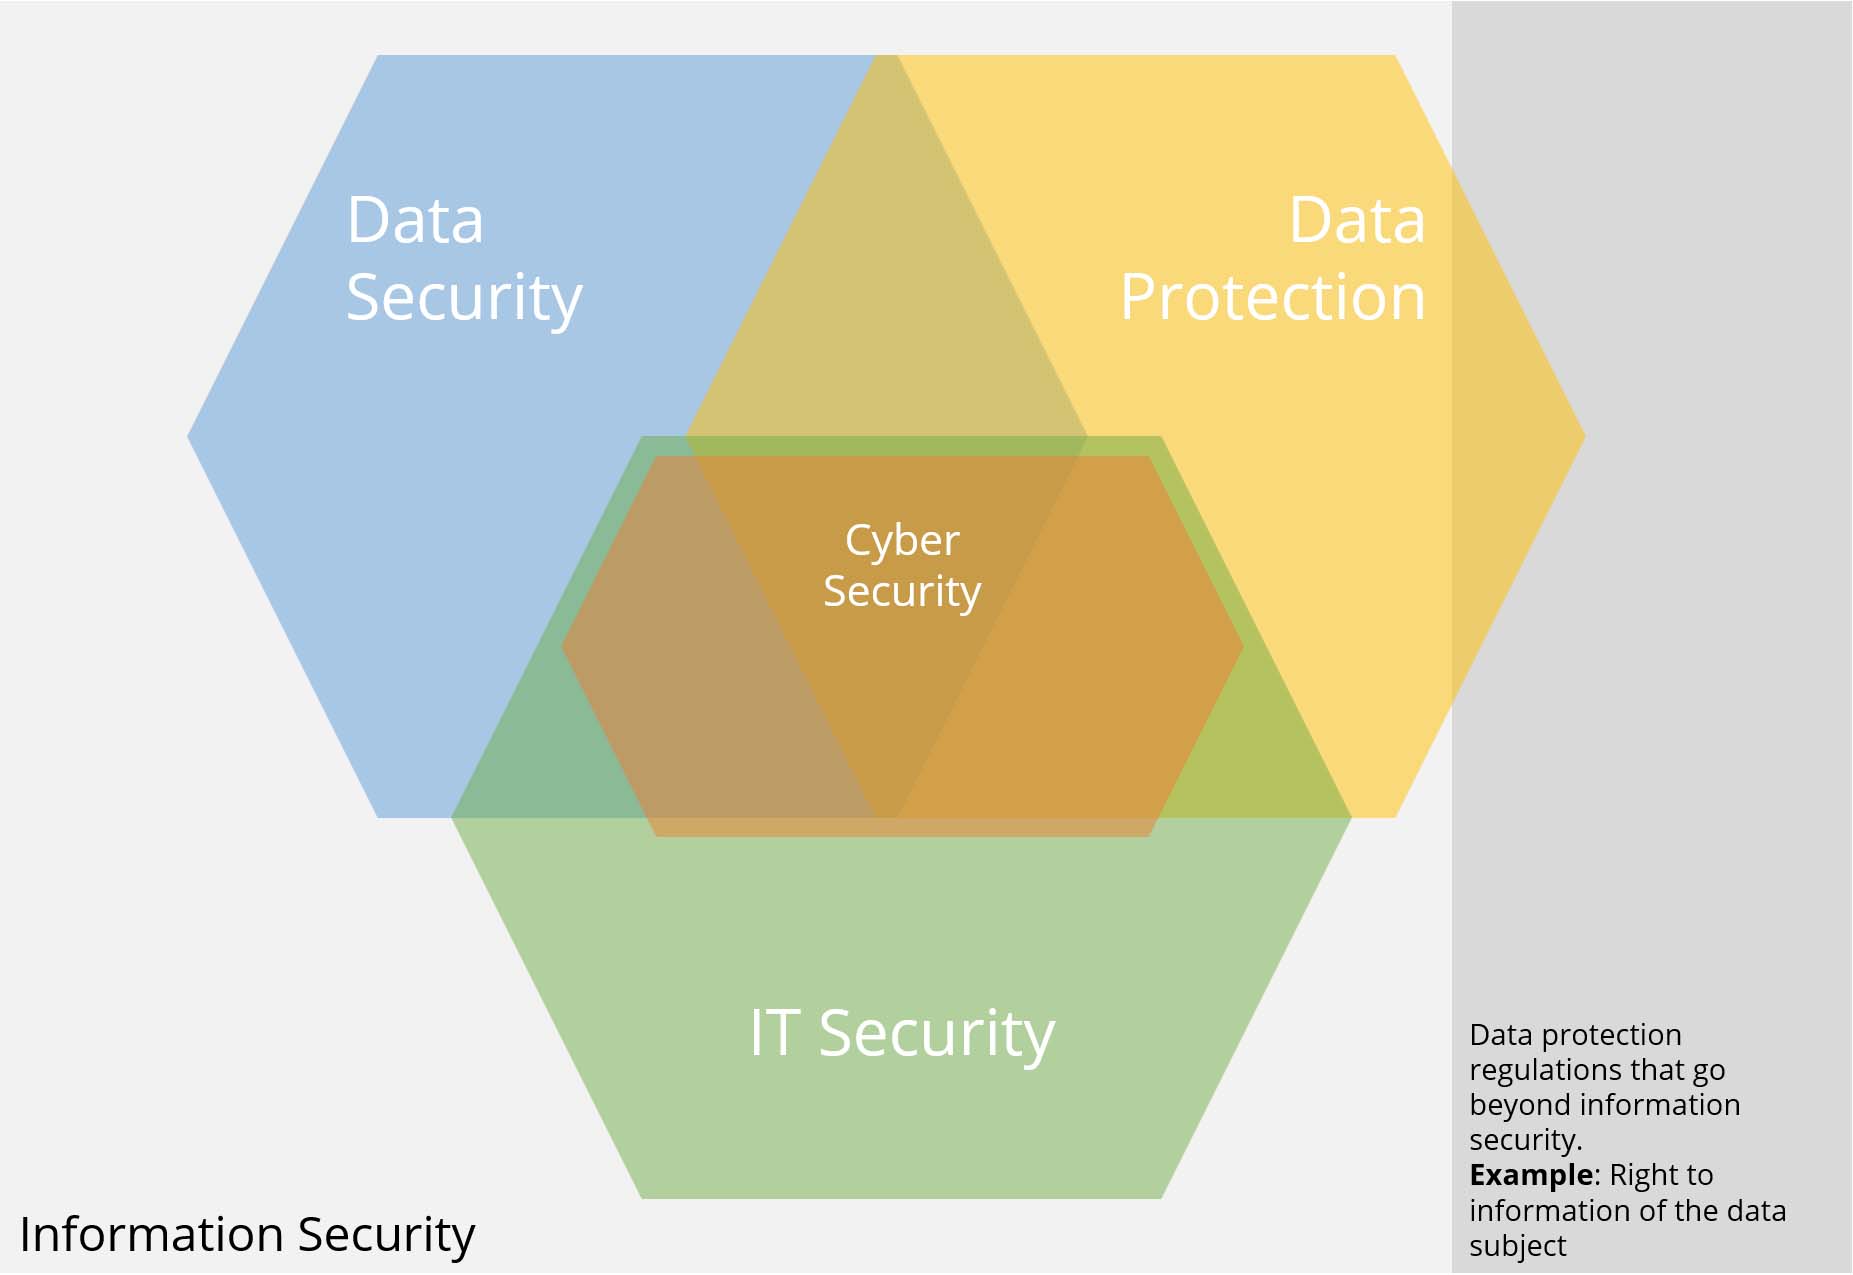 Information security vs. data security vs. IT security vs. cybersecurity